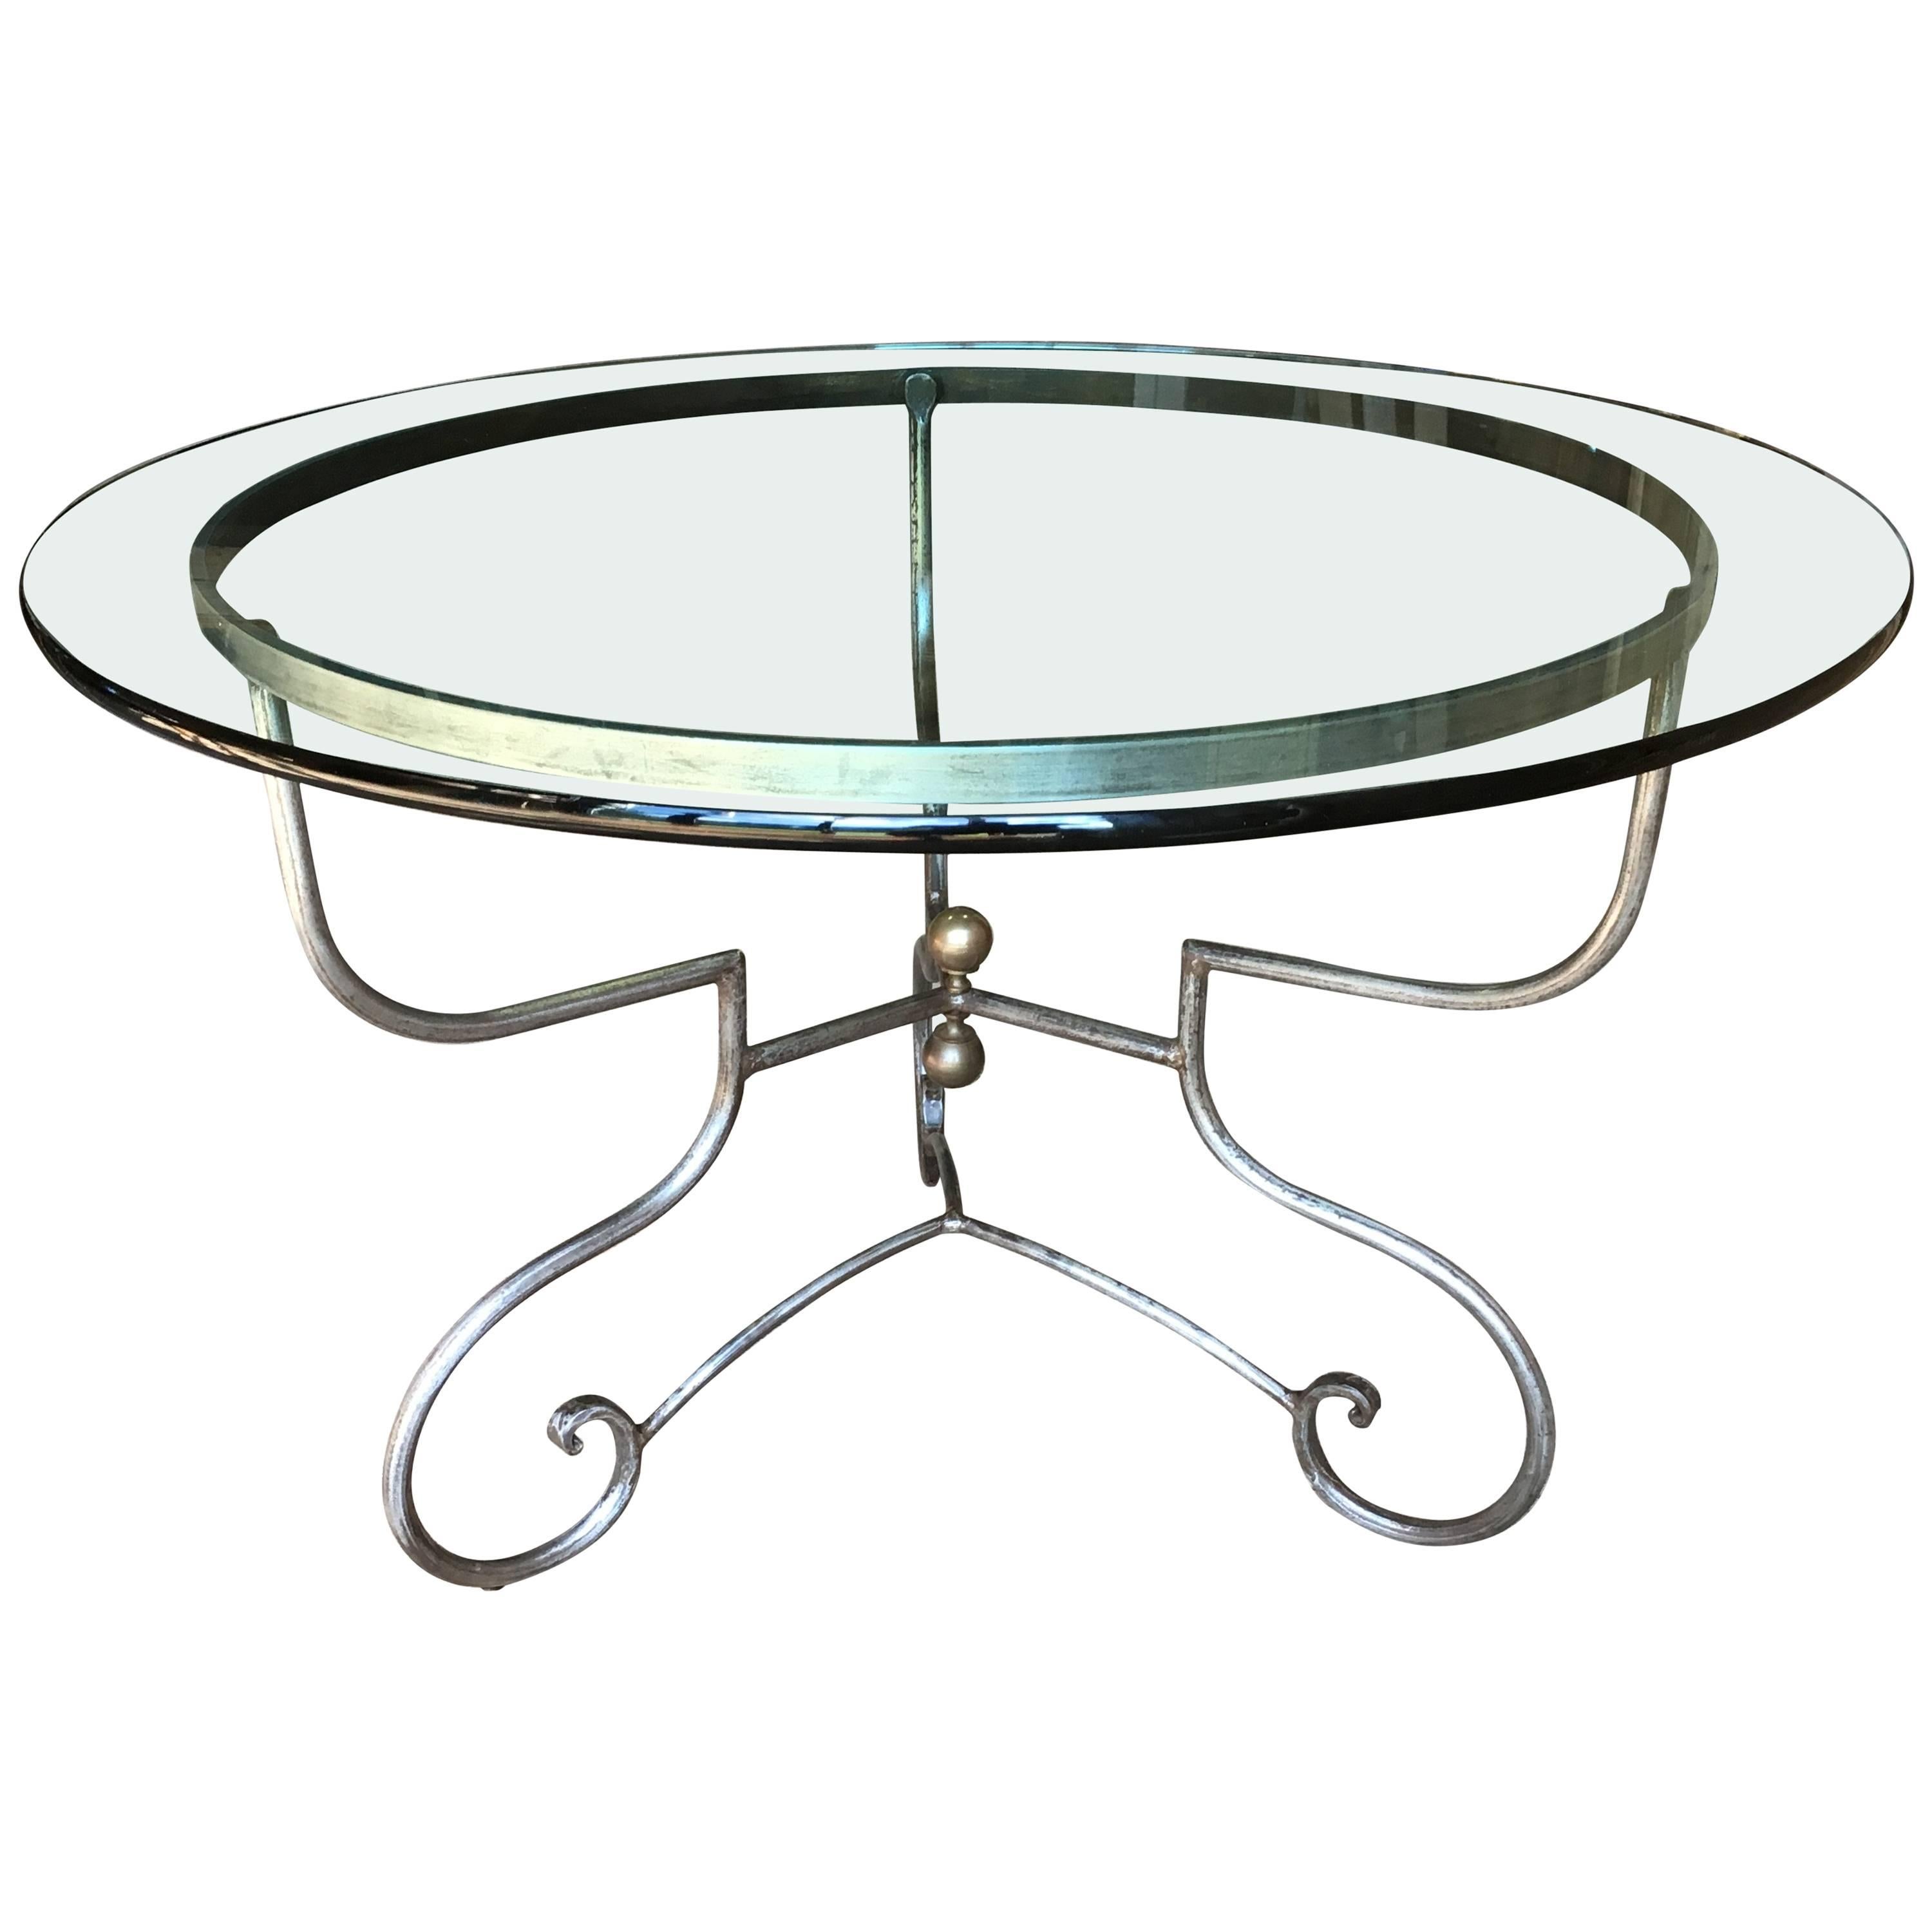 Provincial French Wrought Iron Centre Table, Pierre Deux, circa 1980